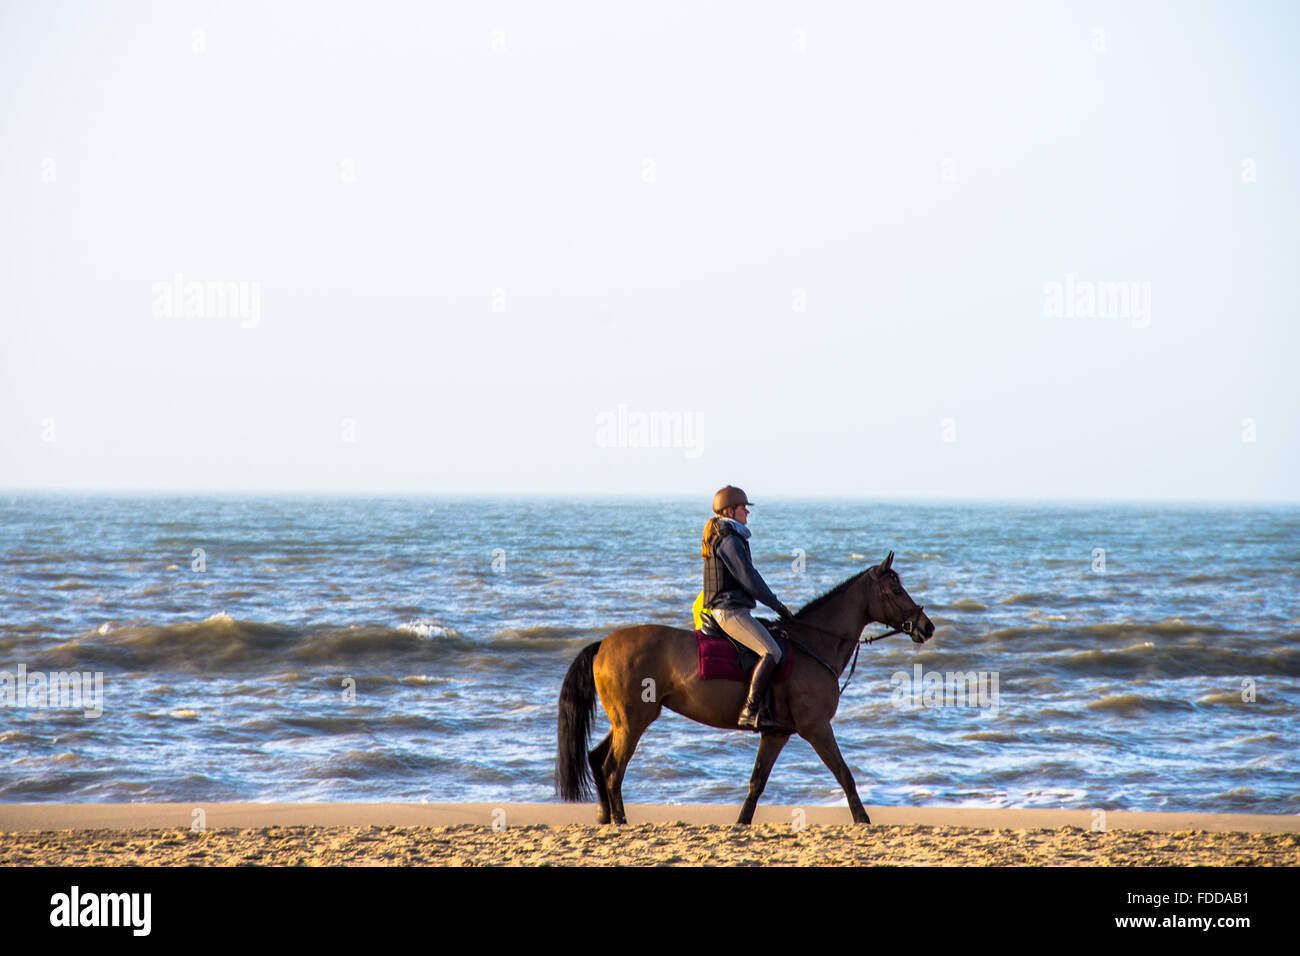 woman riding horse at beach in holland Stock Photo